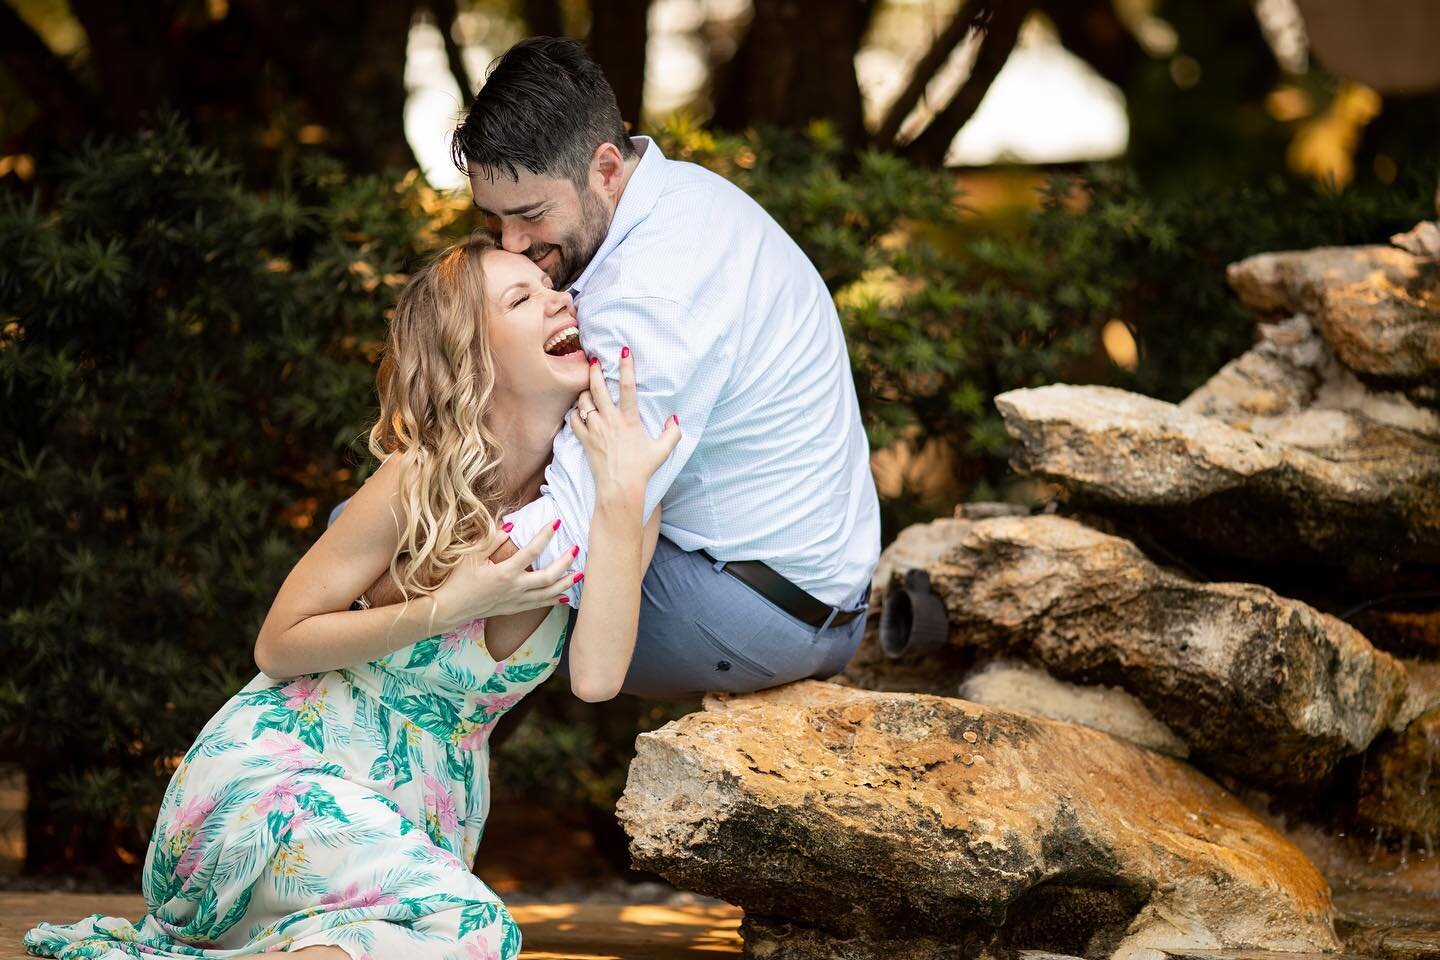 Laughter is the secret to a long and happy life. #danalynnphotos #danalynnphotography #miamiweddingphotographer #miamiweddingvideographer #thesecretgardensmiami #miamiengagement #engagementphotos #engaged #floridaweddingphotographer